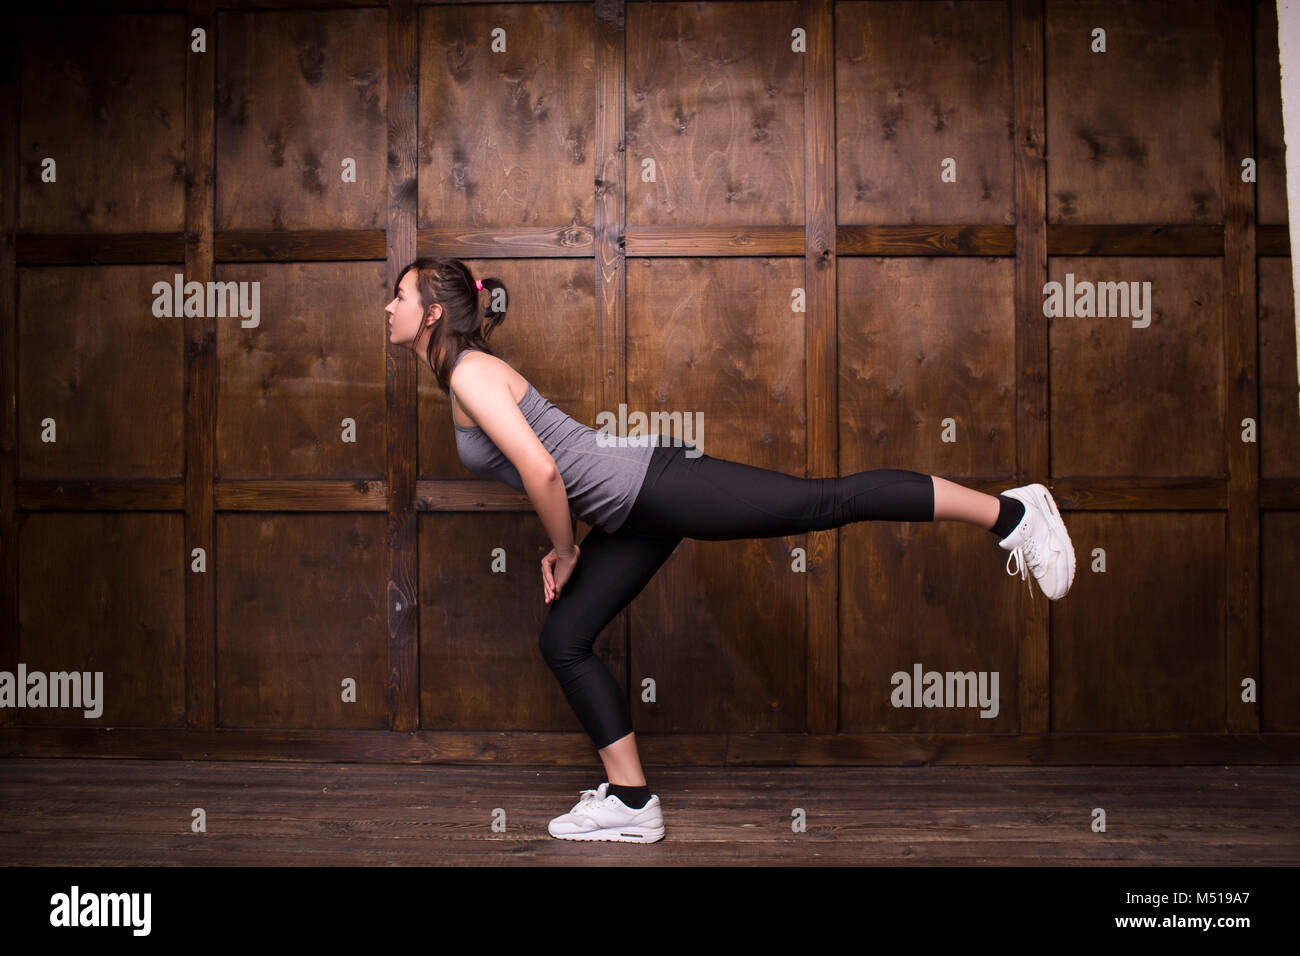 Sport concept - woman doing sports Stock Photo